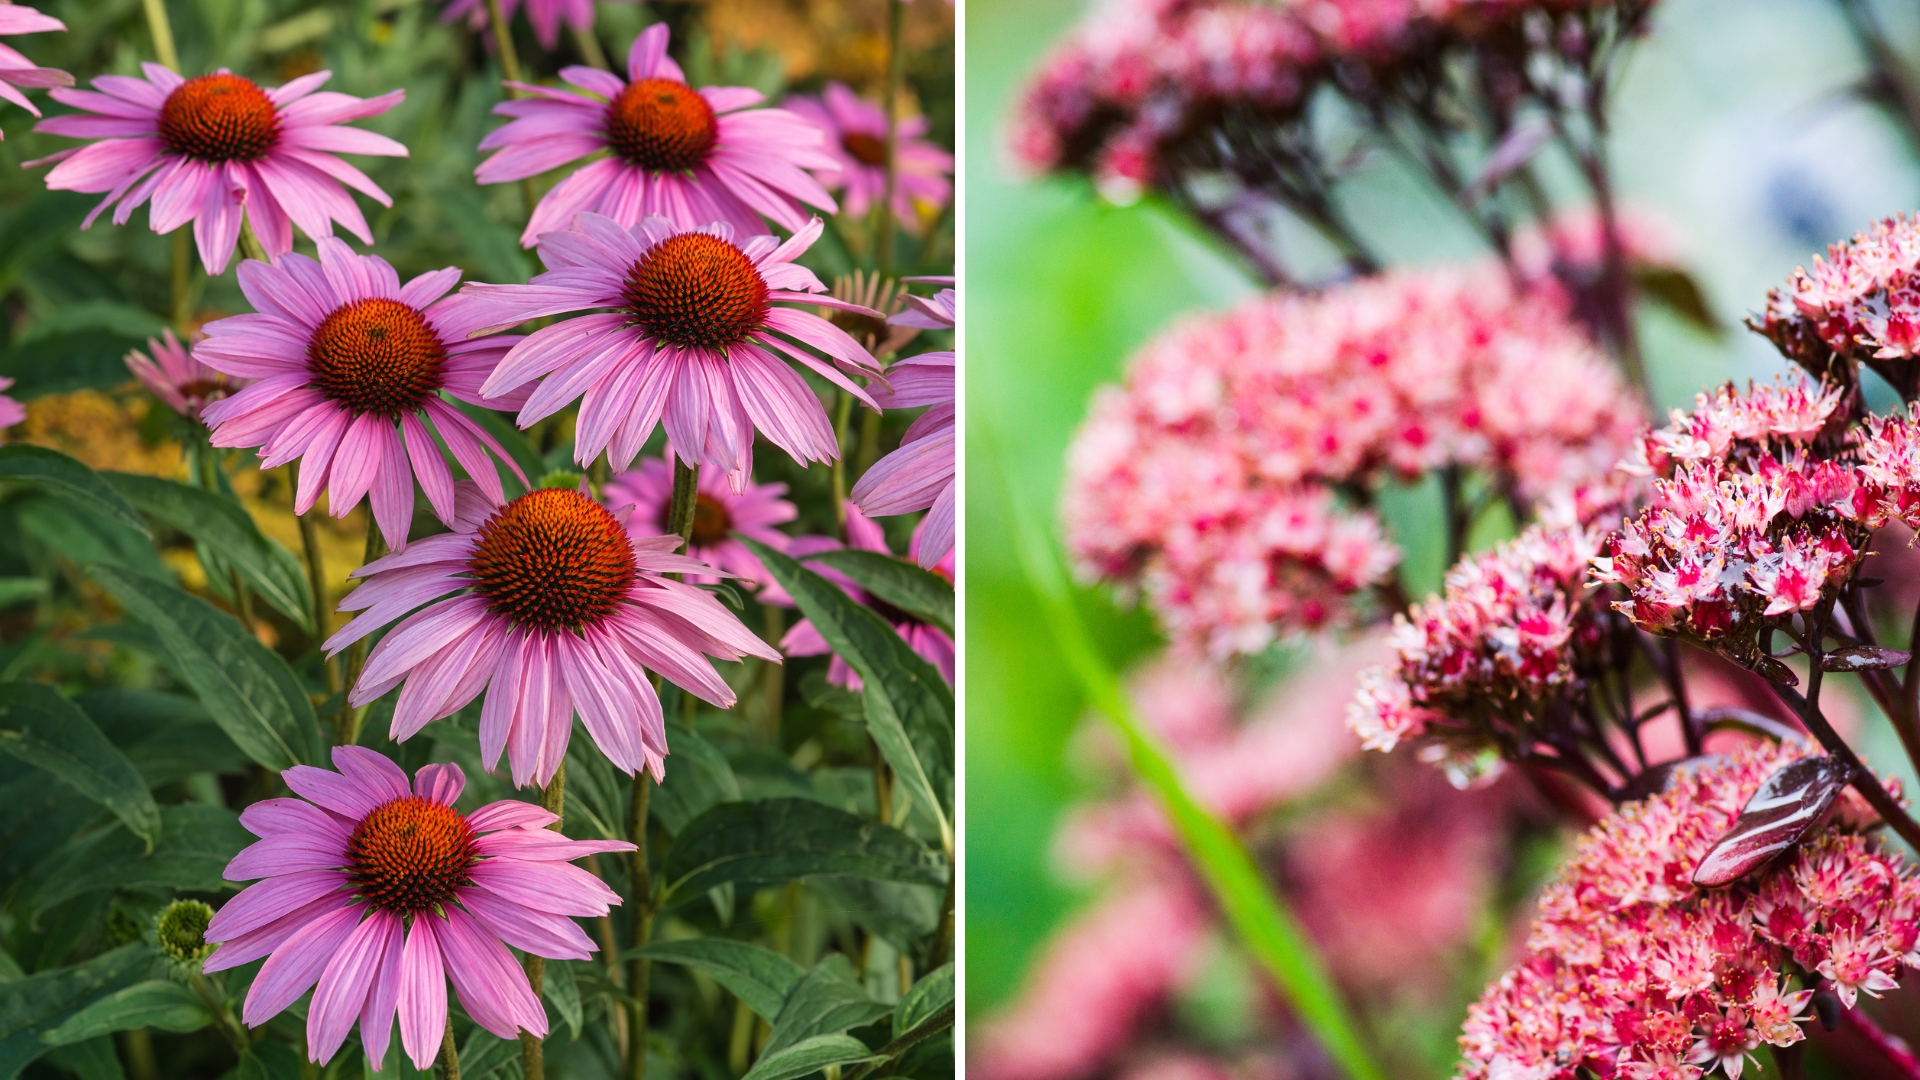 Plant These 6 Absolutely Gorgeous Flowers In Spring For A Dazzling Display All Season Long